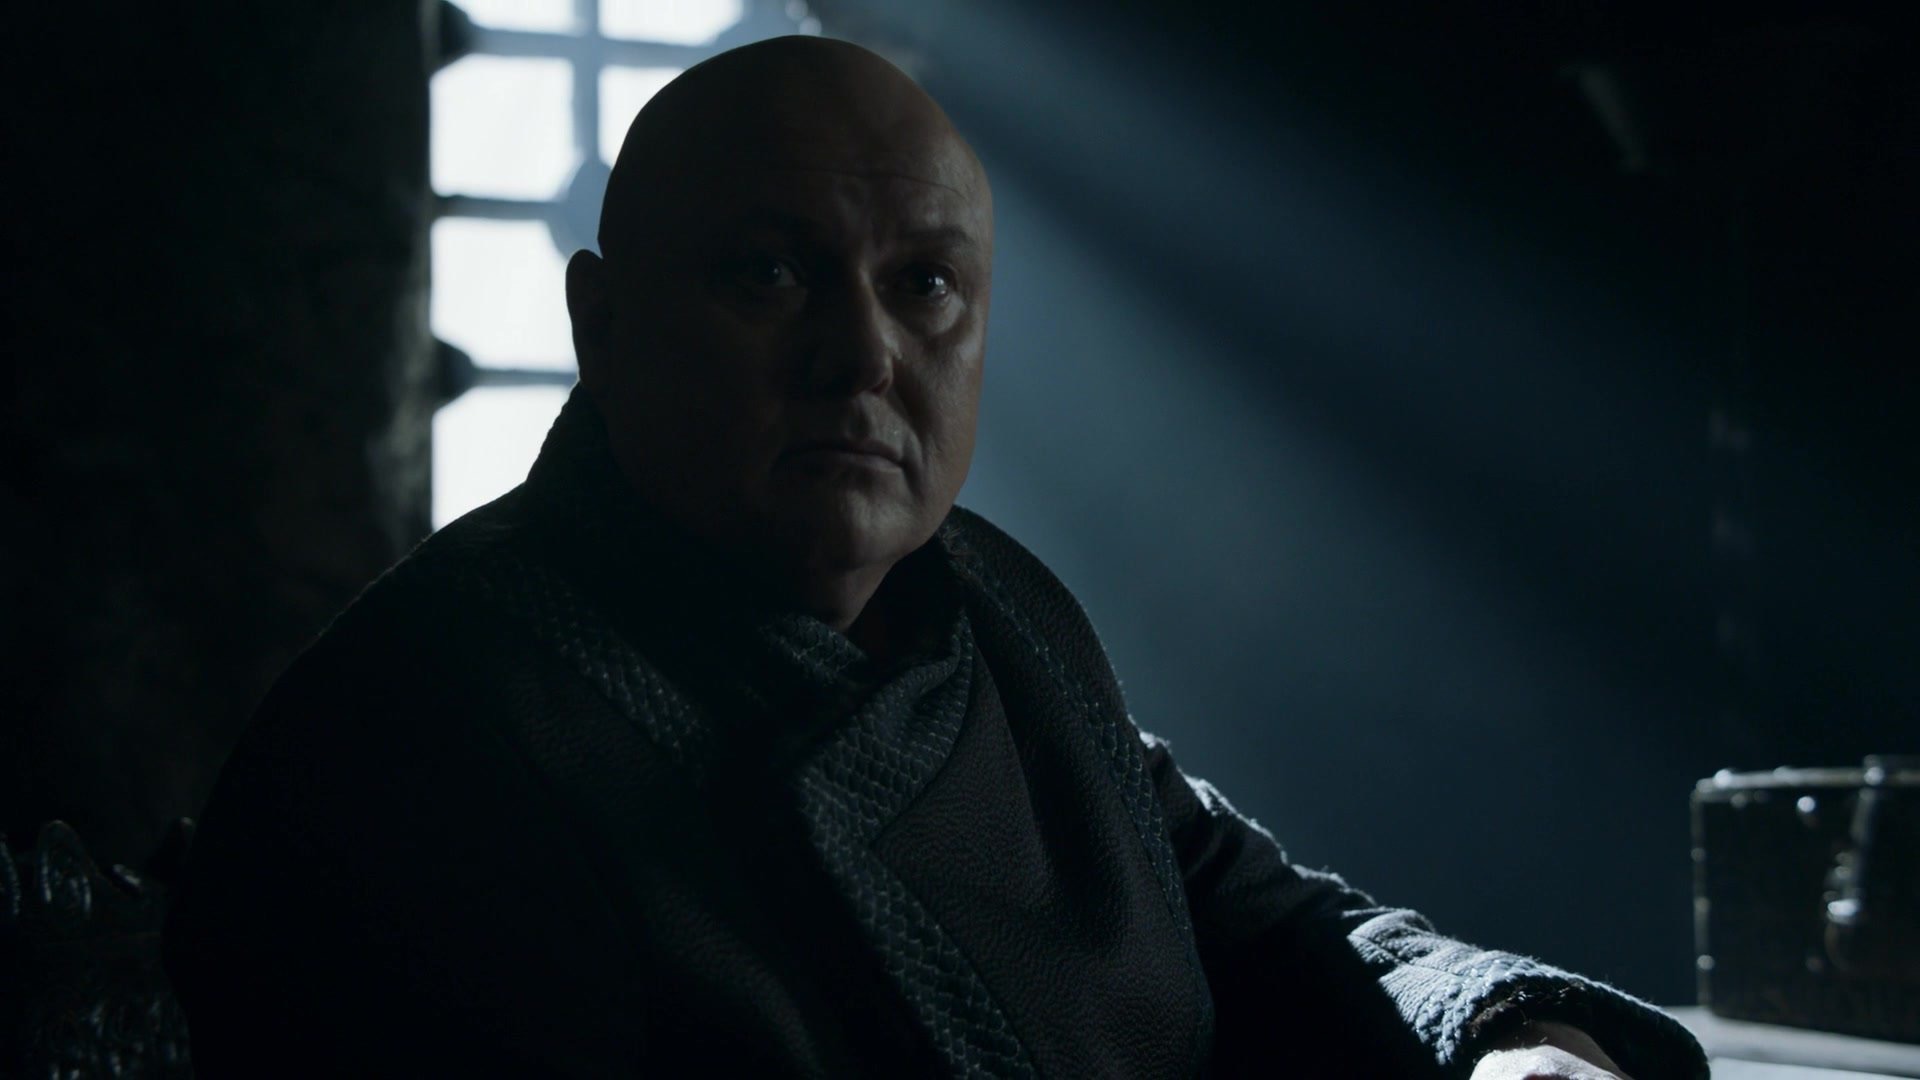 Varys (Conleth Hill) is summoned in Game of Thrones Season 8 Episode 5 “The Bells” (2019), HBO